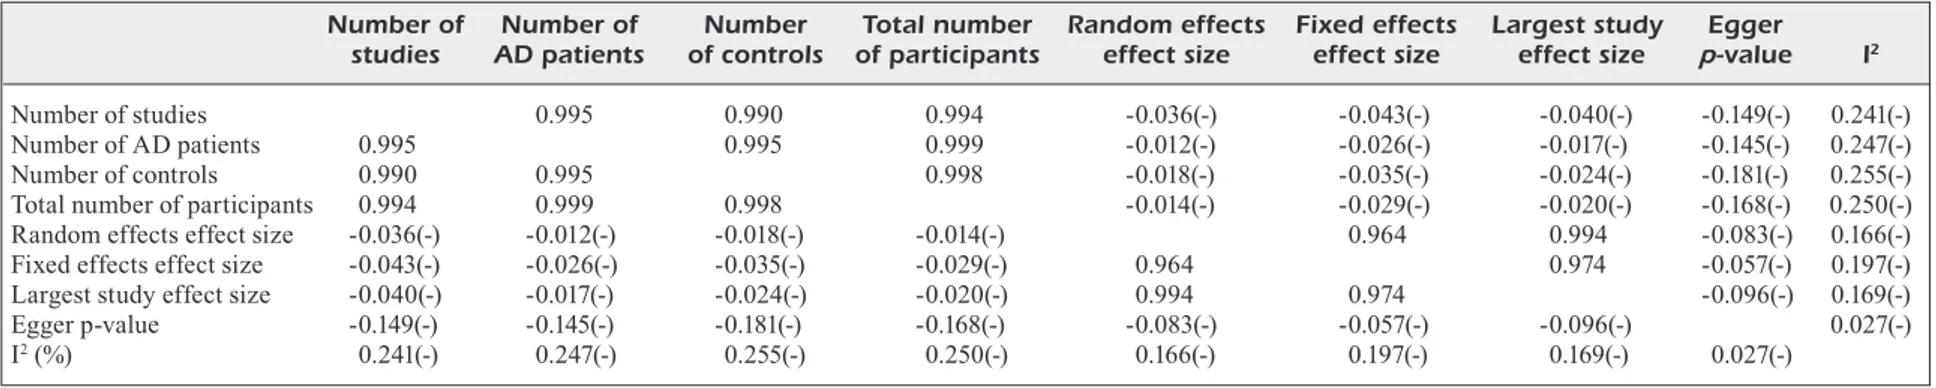 Table III. Correlations among variables from the 38 meta-analyses concerning the CSF biomarkers between AD and controls.